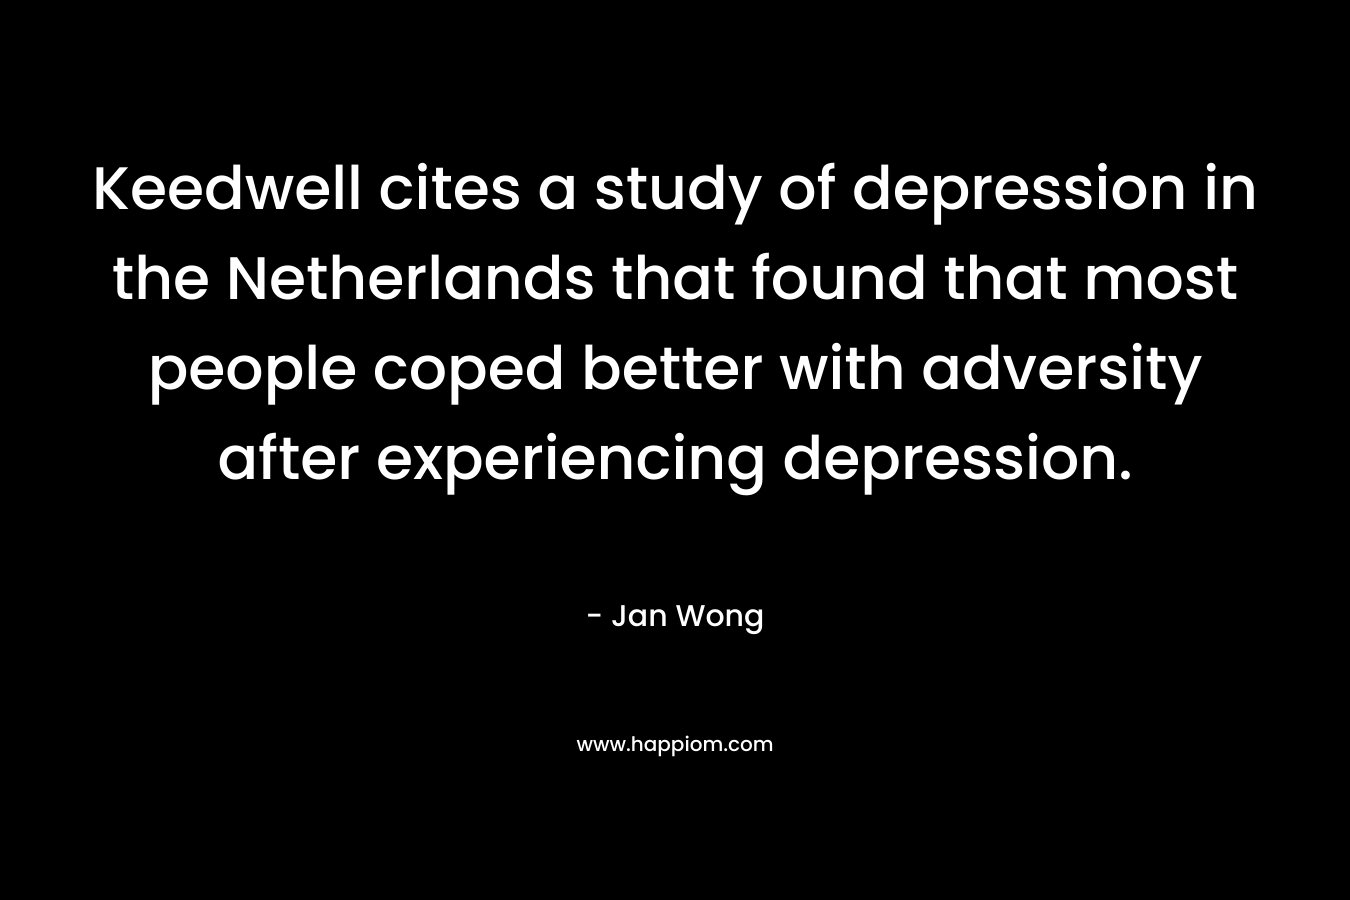 Keedwell cites a study of depression in the Netherlands that found that most people coped better with adversity after experiencing depression. – Jan Wong